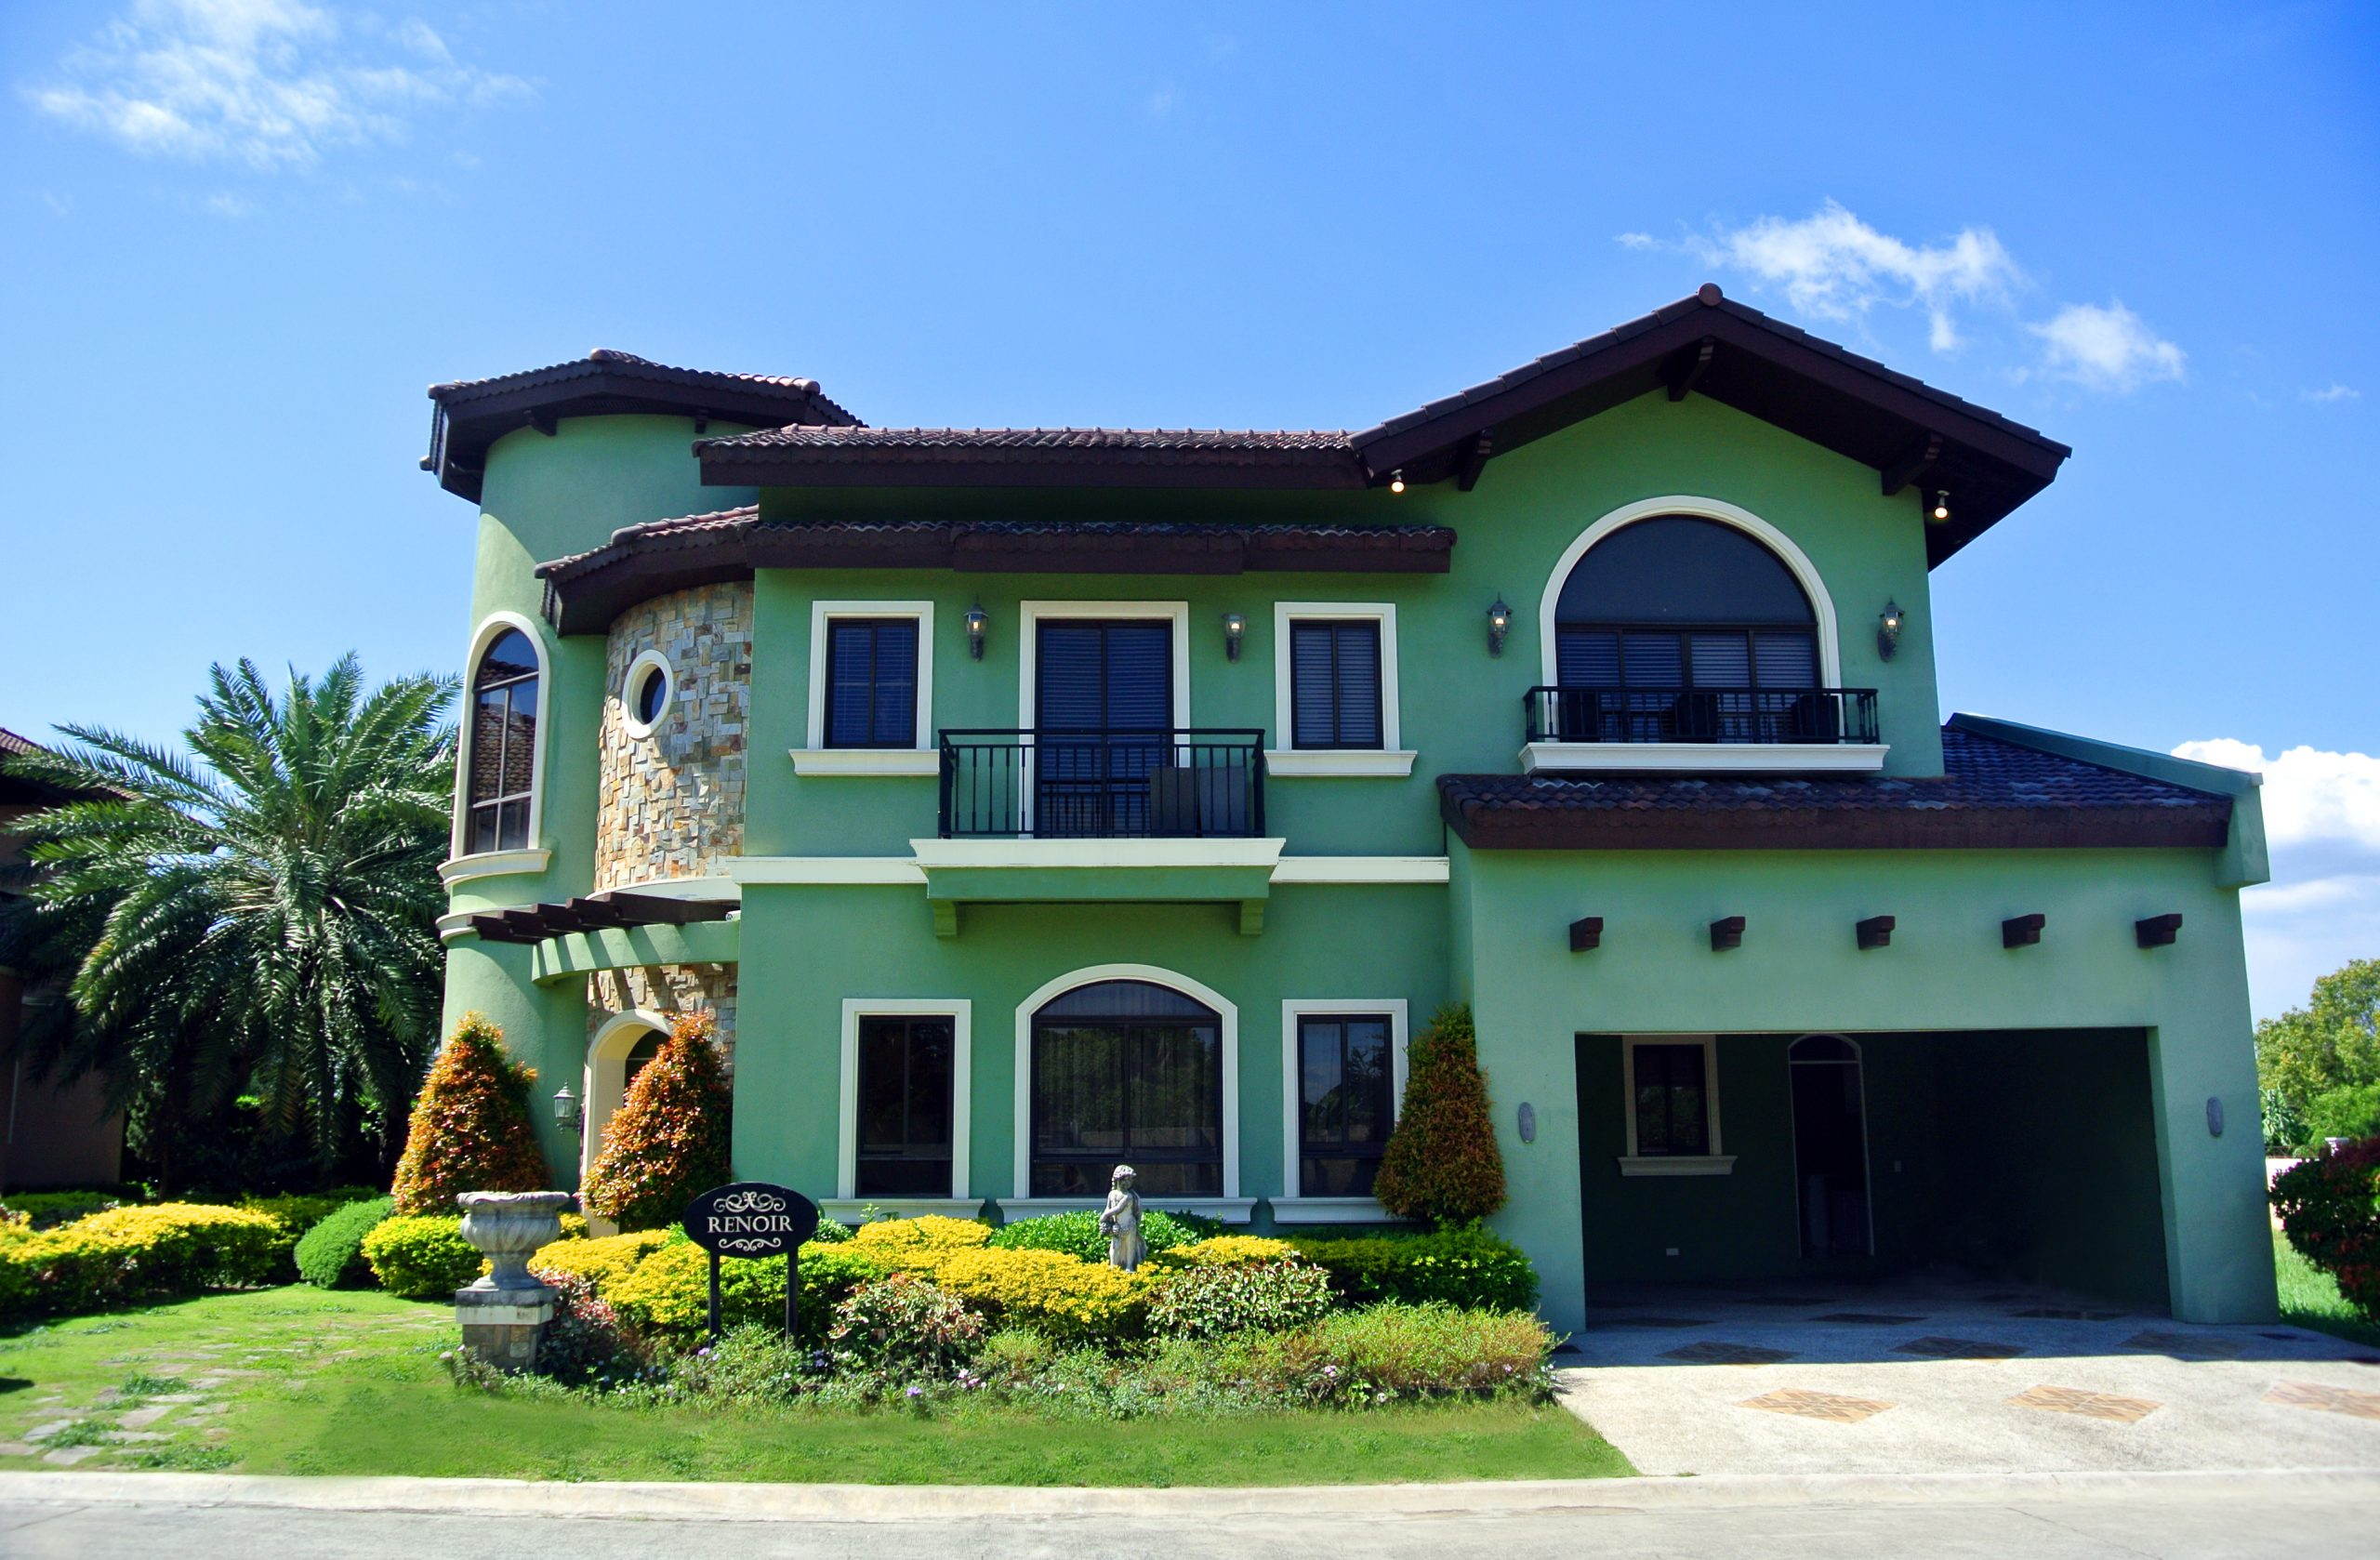 Lot Area: 333 sq.m. | Floor Area: 349 sq.m. | (Img Link: https://www.brittany.com.ph/wp-content/uploads/2018/06/Ghiberti-luxury-house-model-in-Portofino-Vista-Alabang-Luxury-Homes-by-Brittany-scaled.jpg)